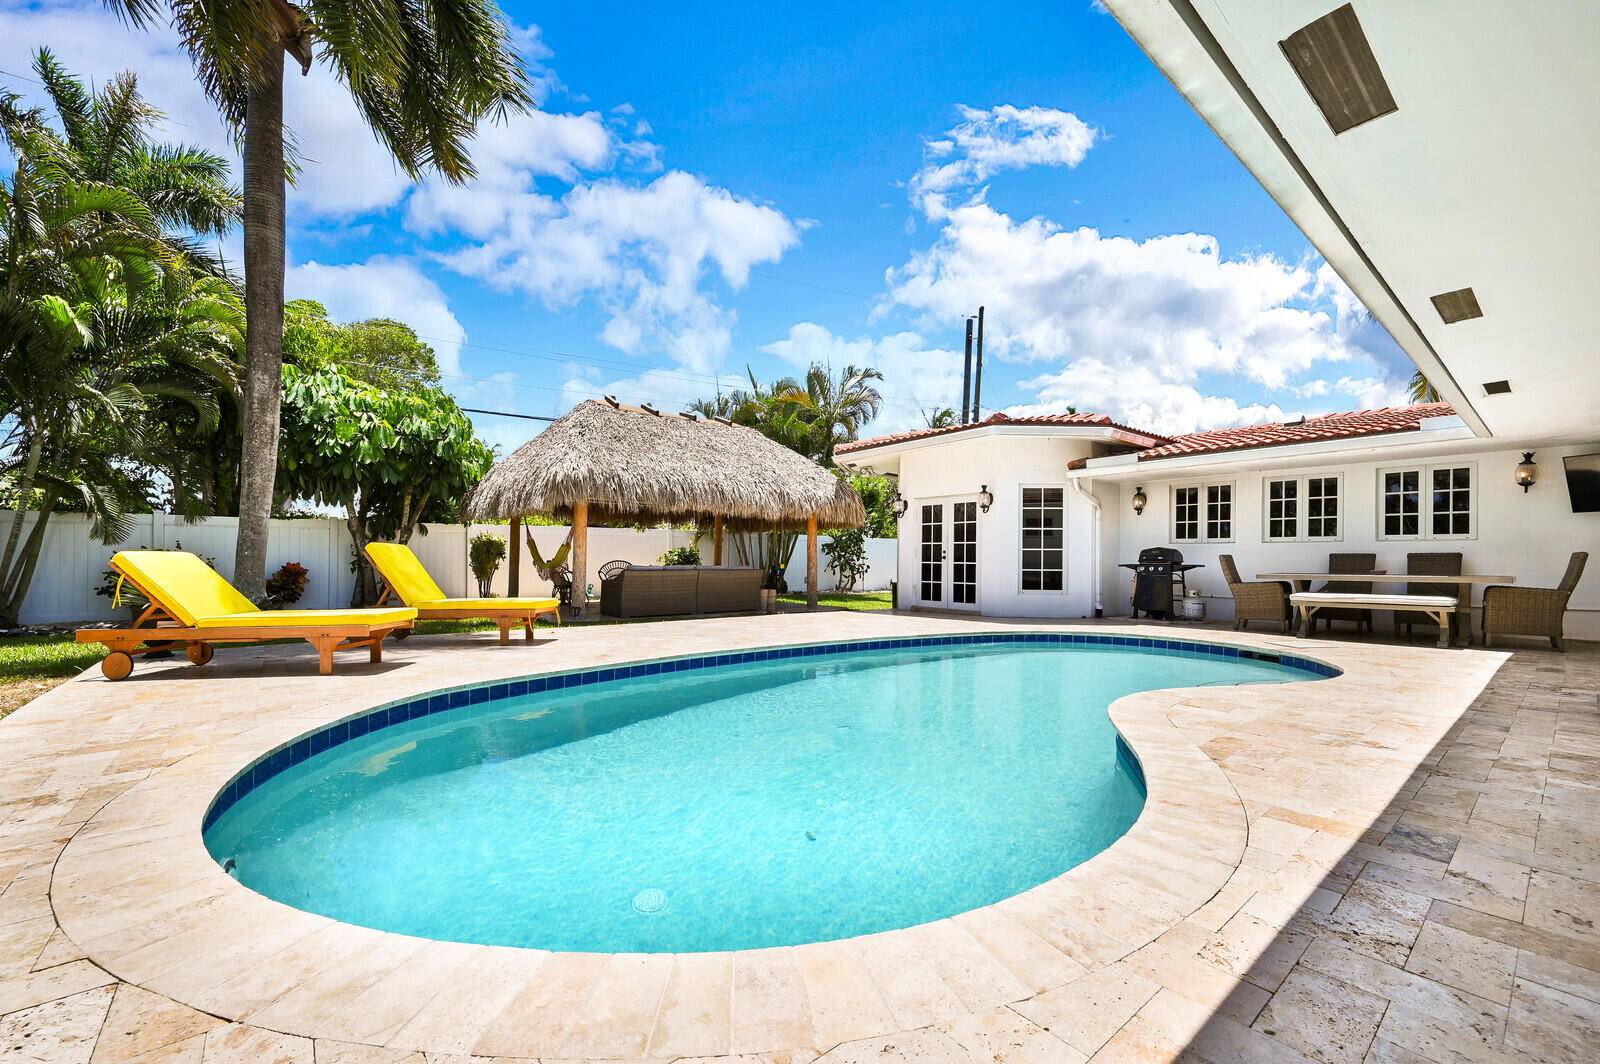 This Short Term SEASONAL OFF SEASON rental in Deerfield Beach's desirable COVE has it ALL, Sprawling at 2400 sq ft w enough room for each family member to enjoy his ...